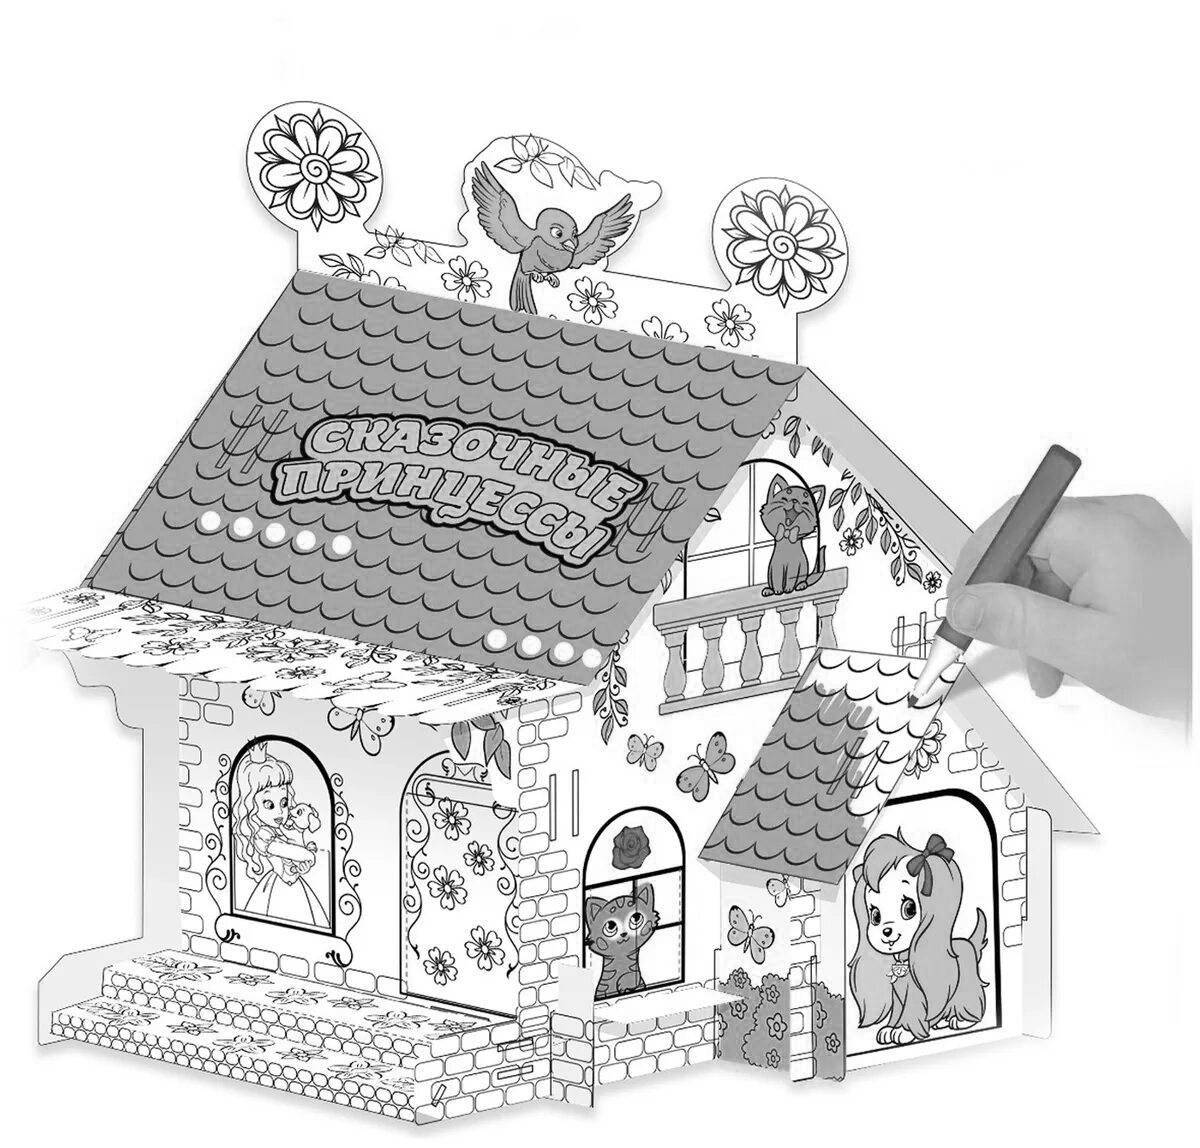 Intriguing princess house coloring book for kids